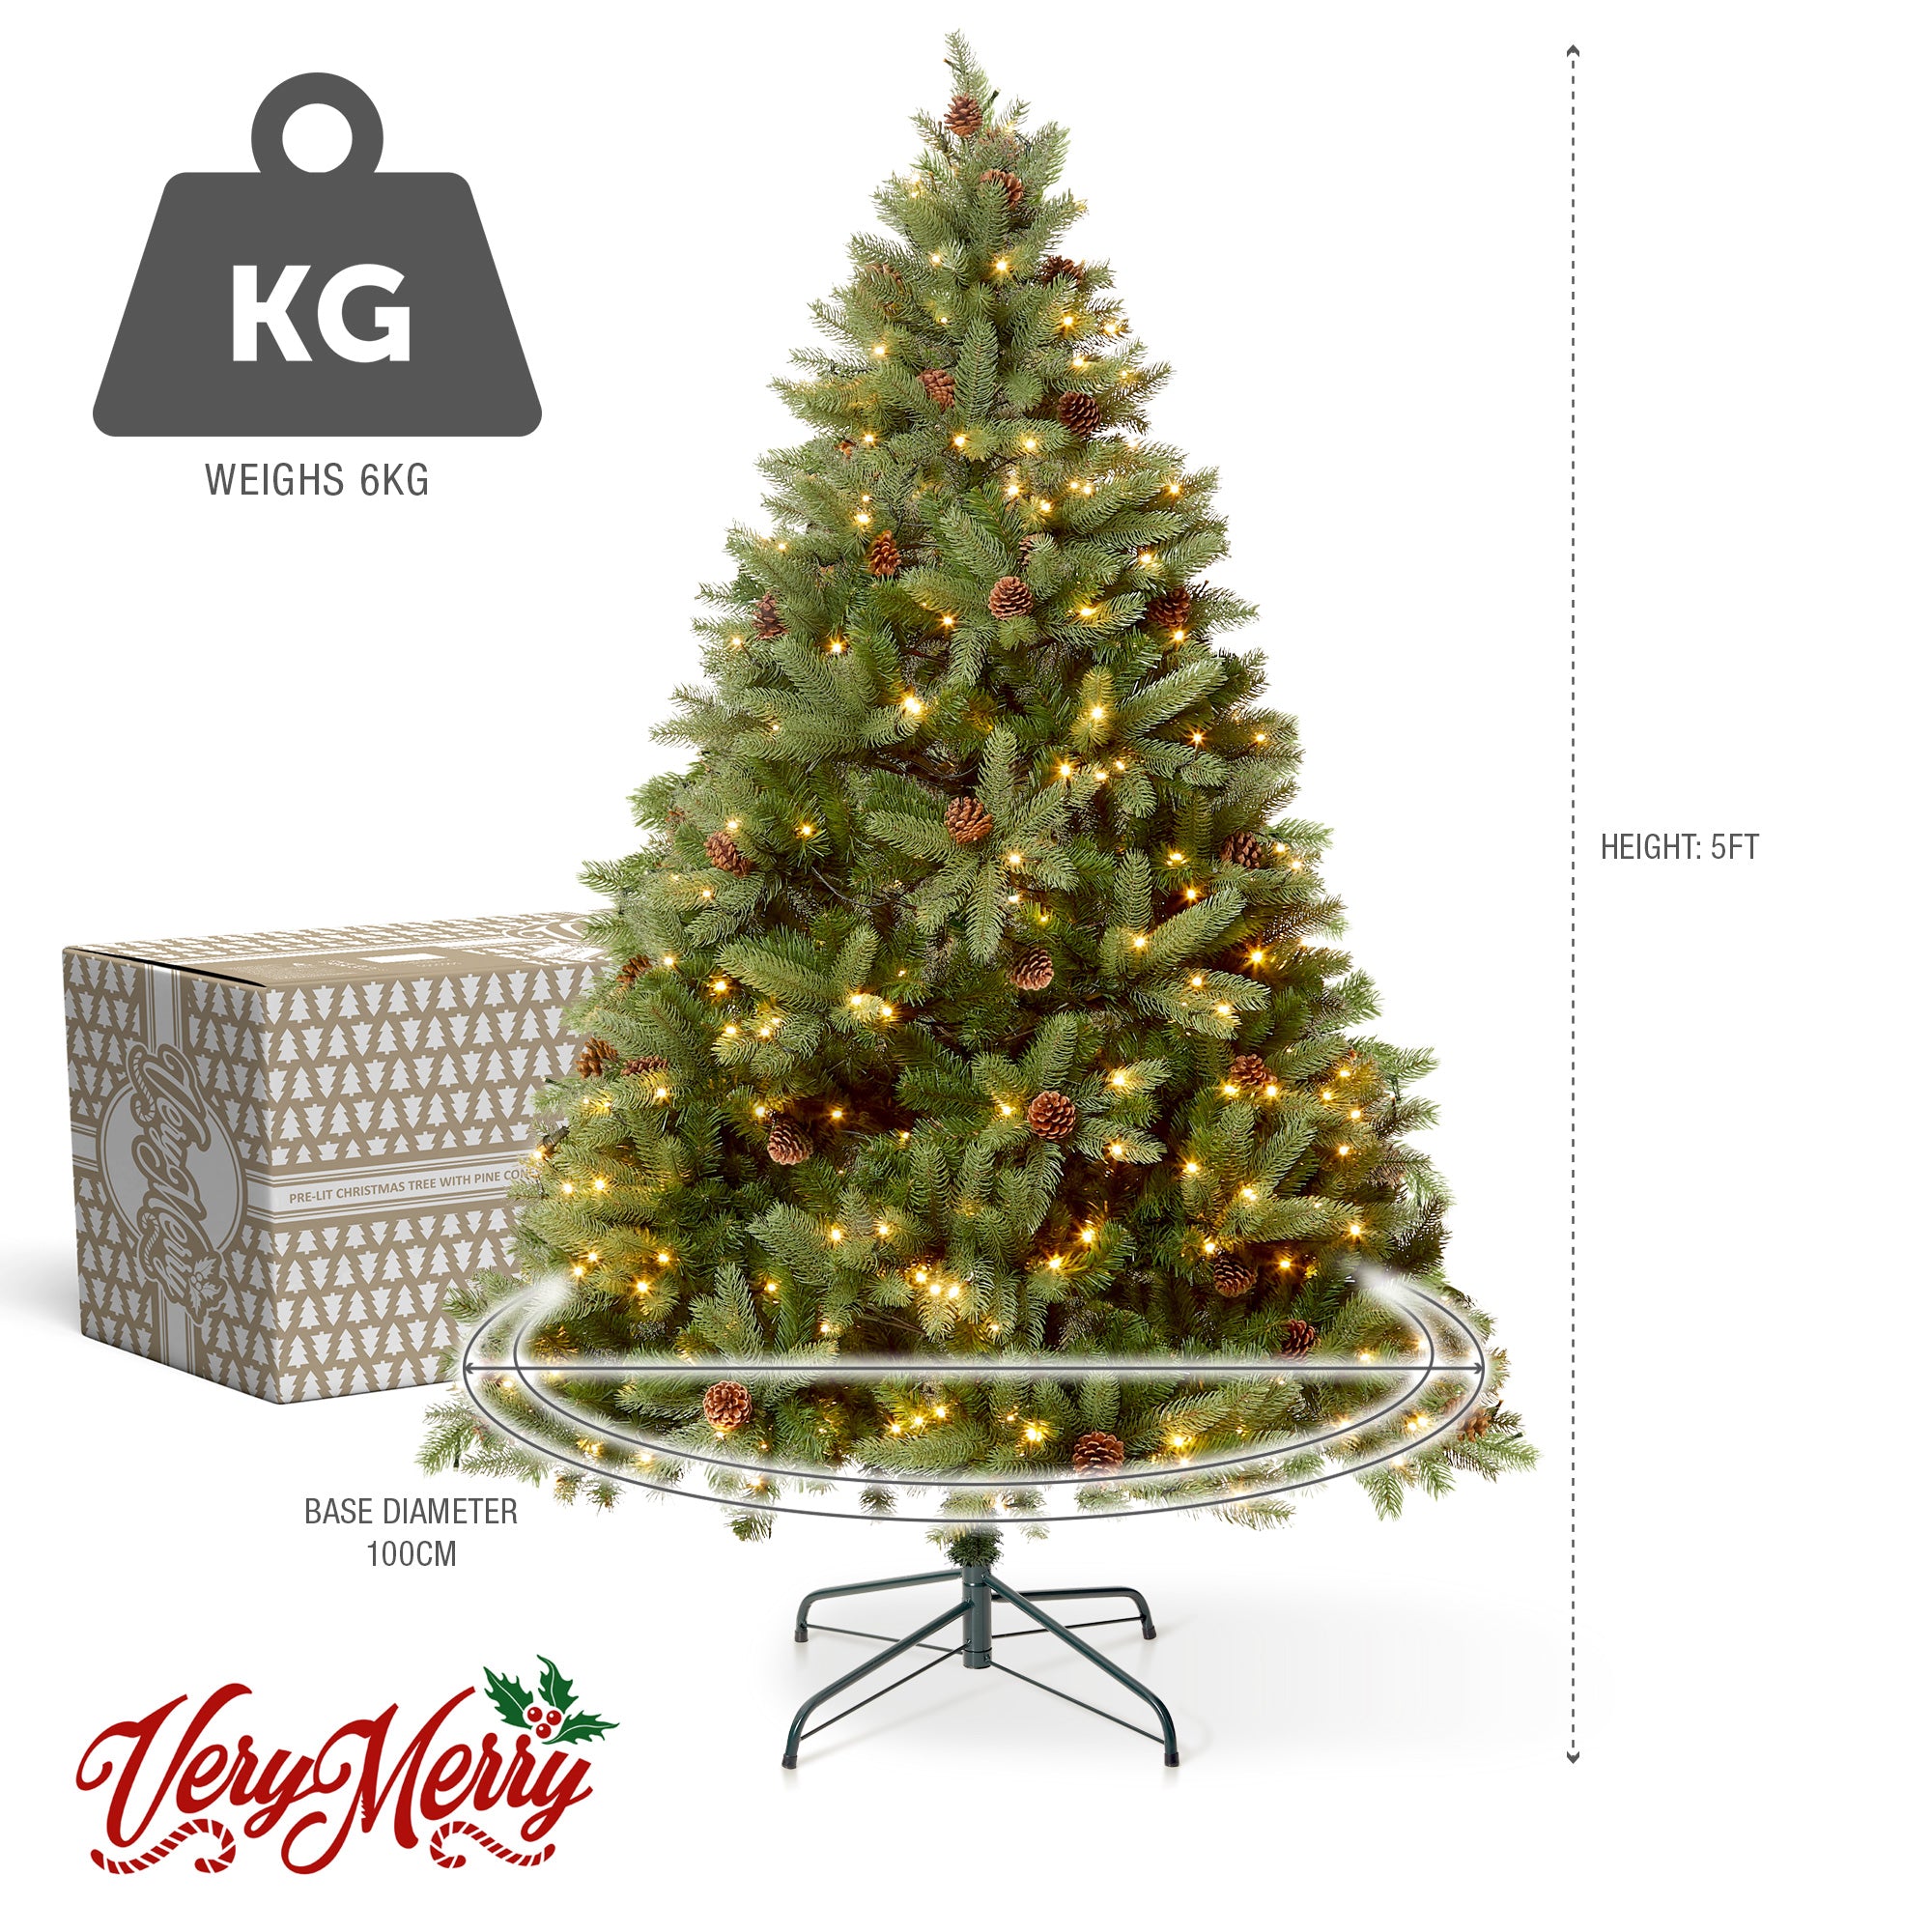 VeryMerry 5FT 'Ascot' Pre-Lit Christmas Tree with 200 Built-In Warm White LED Lights with Auto-Off Timer, 8 Lighting Modes and Real Decorative Pinecones